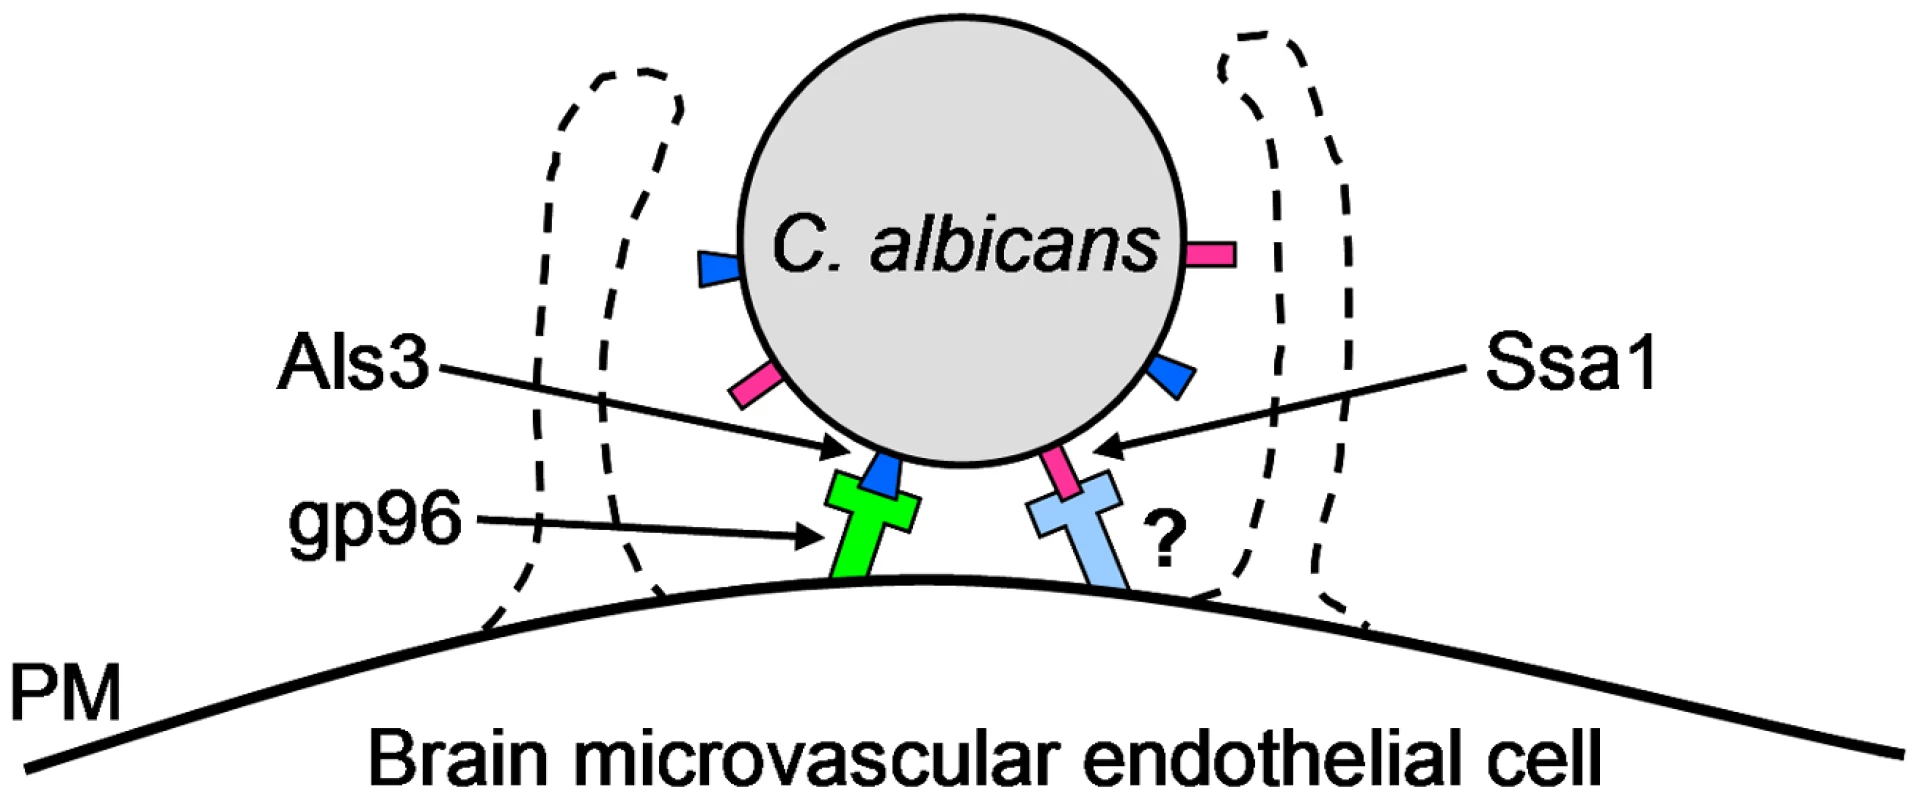 Model of the receptor-ligand interactions that mediate the endocytosis of <i>C. albicans</i> by HBMECs.